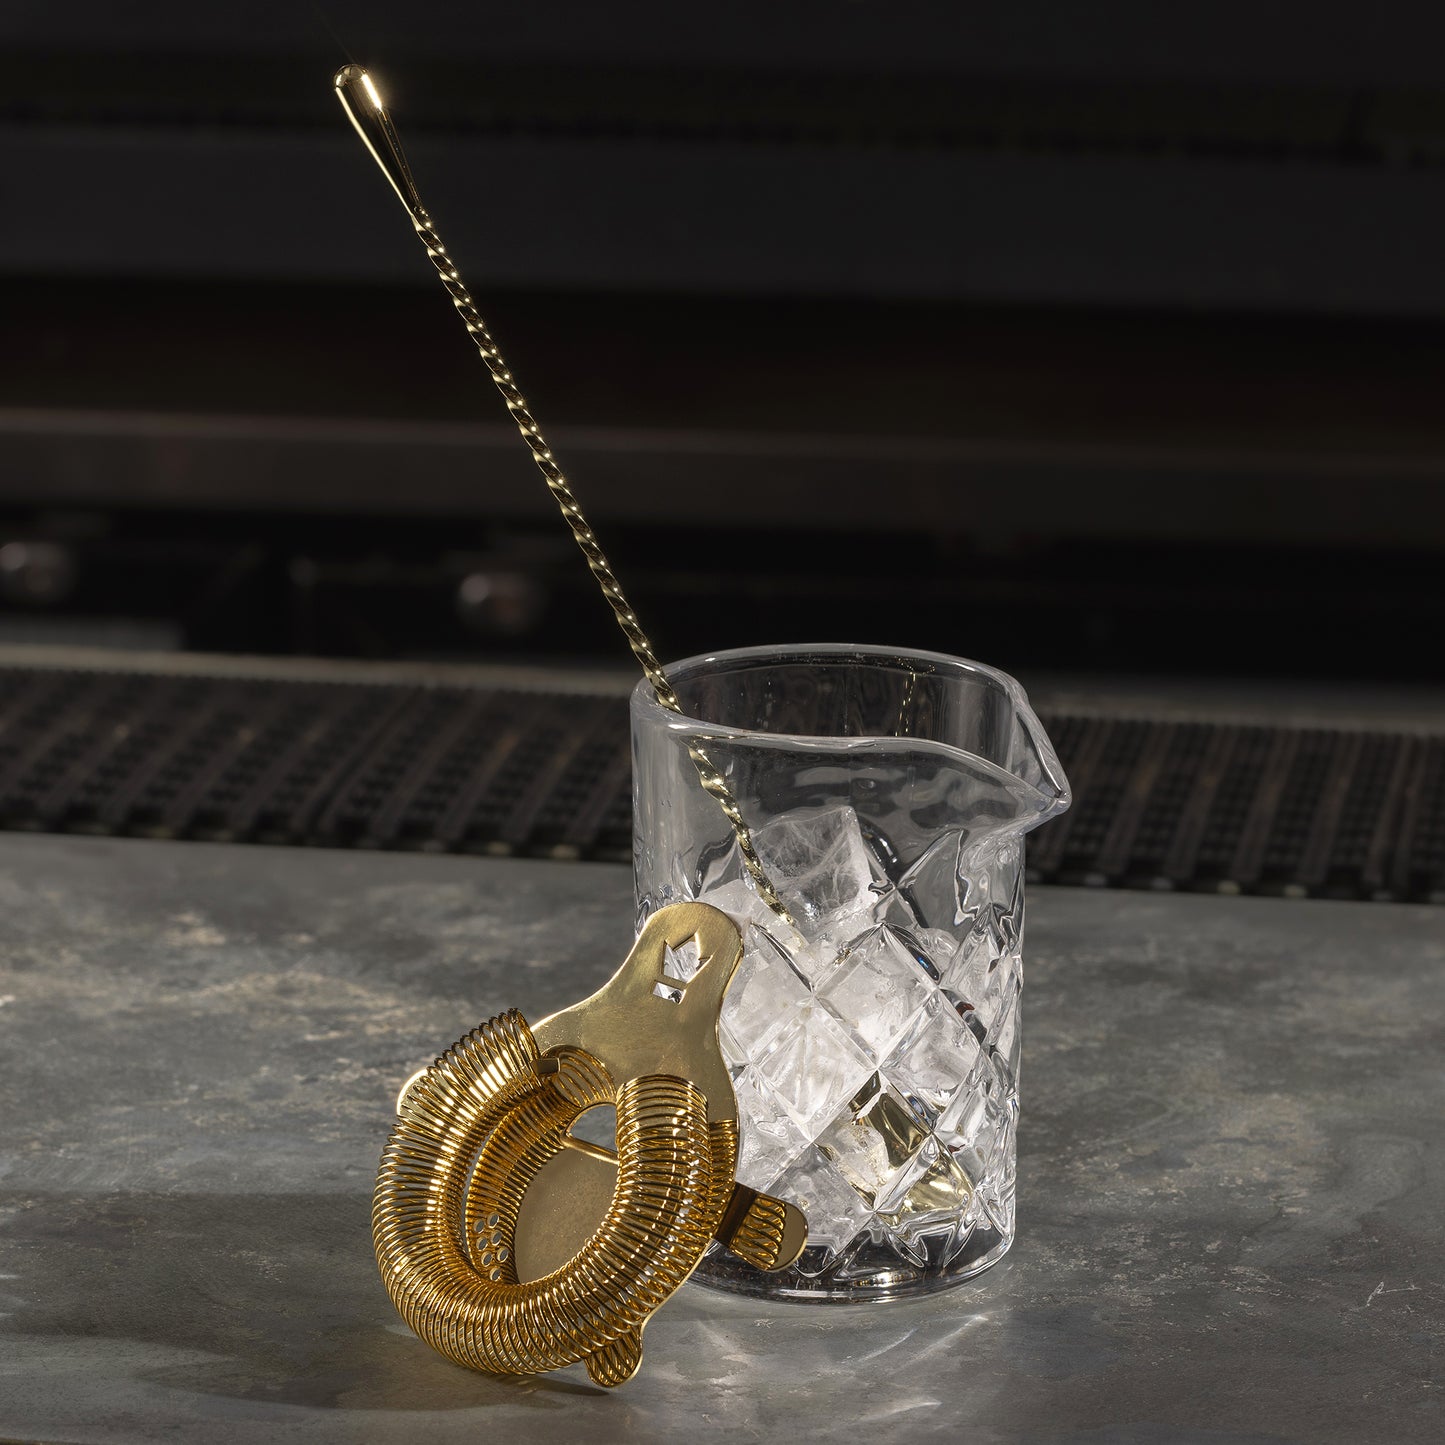 BUSWELL® BOBTAIL COCKTAIL STRAINER – GOLD-PLATED